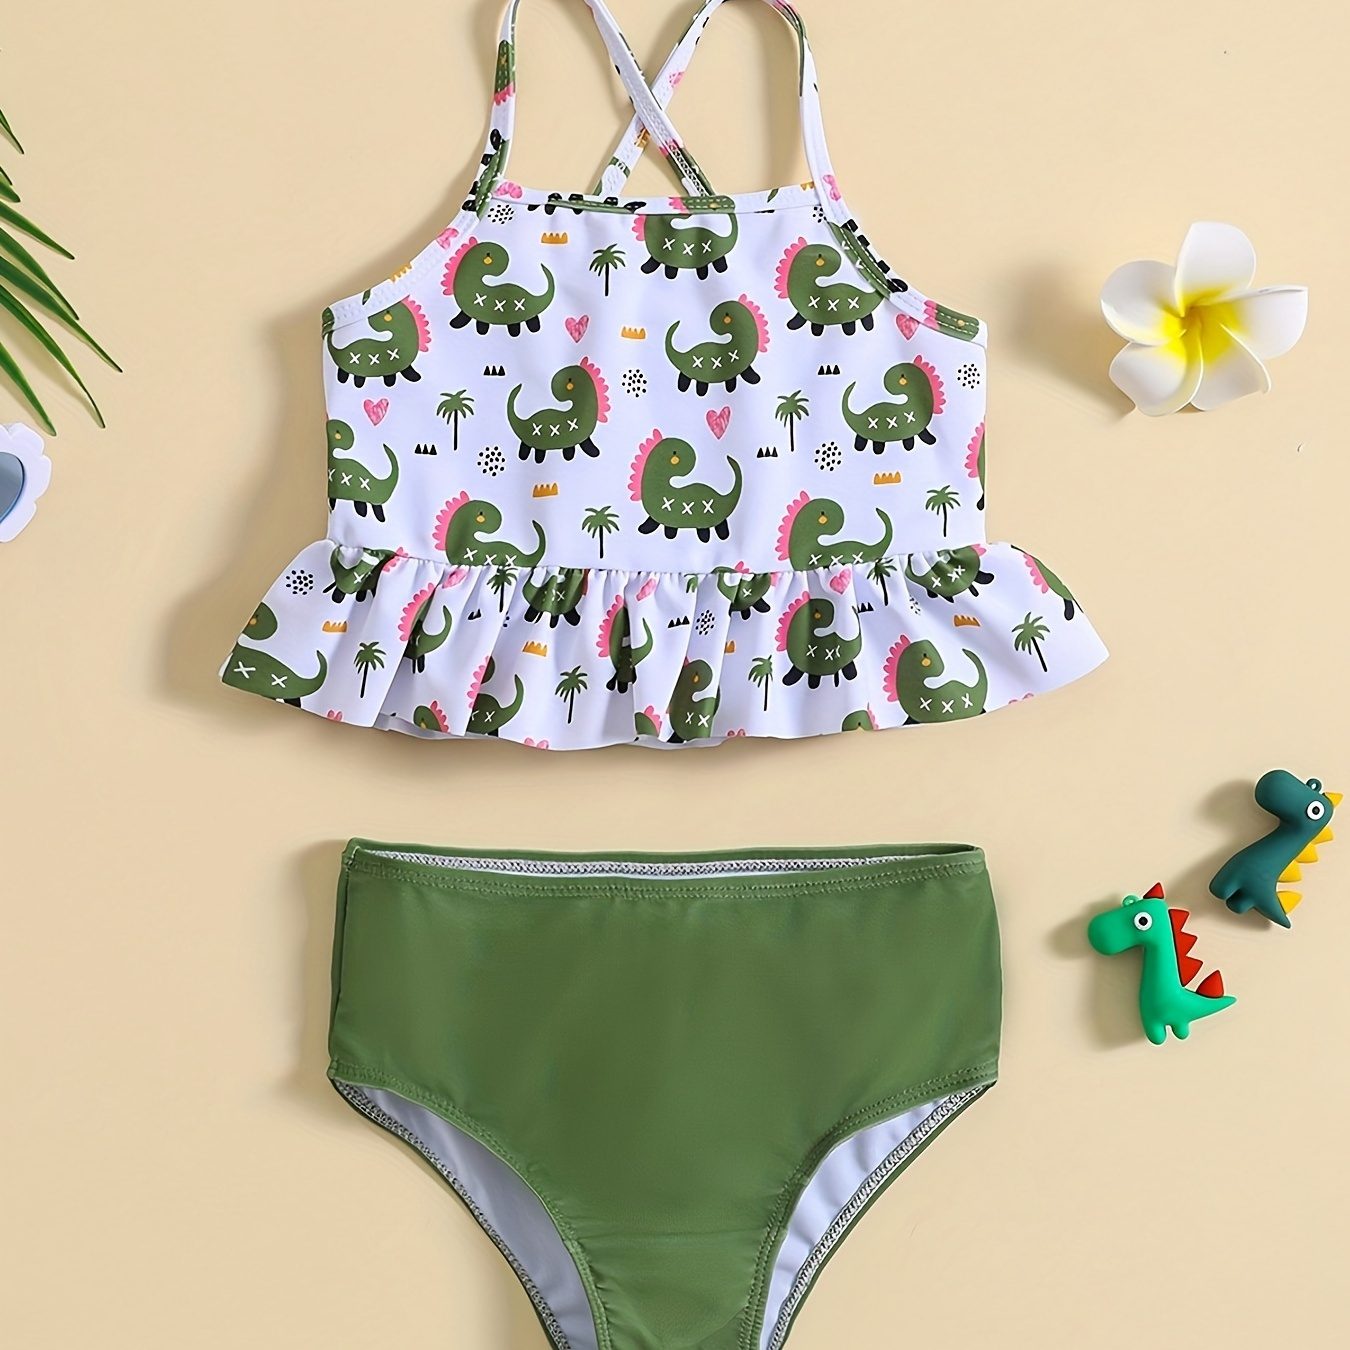 

2pcs Toddler Girls Lovely Dino Print Cami Top + Bow Decor Briefs Bikini Swimsuit Set For Summer Clothes Gift Beach Vacation